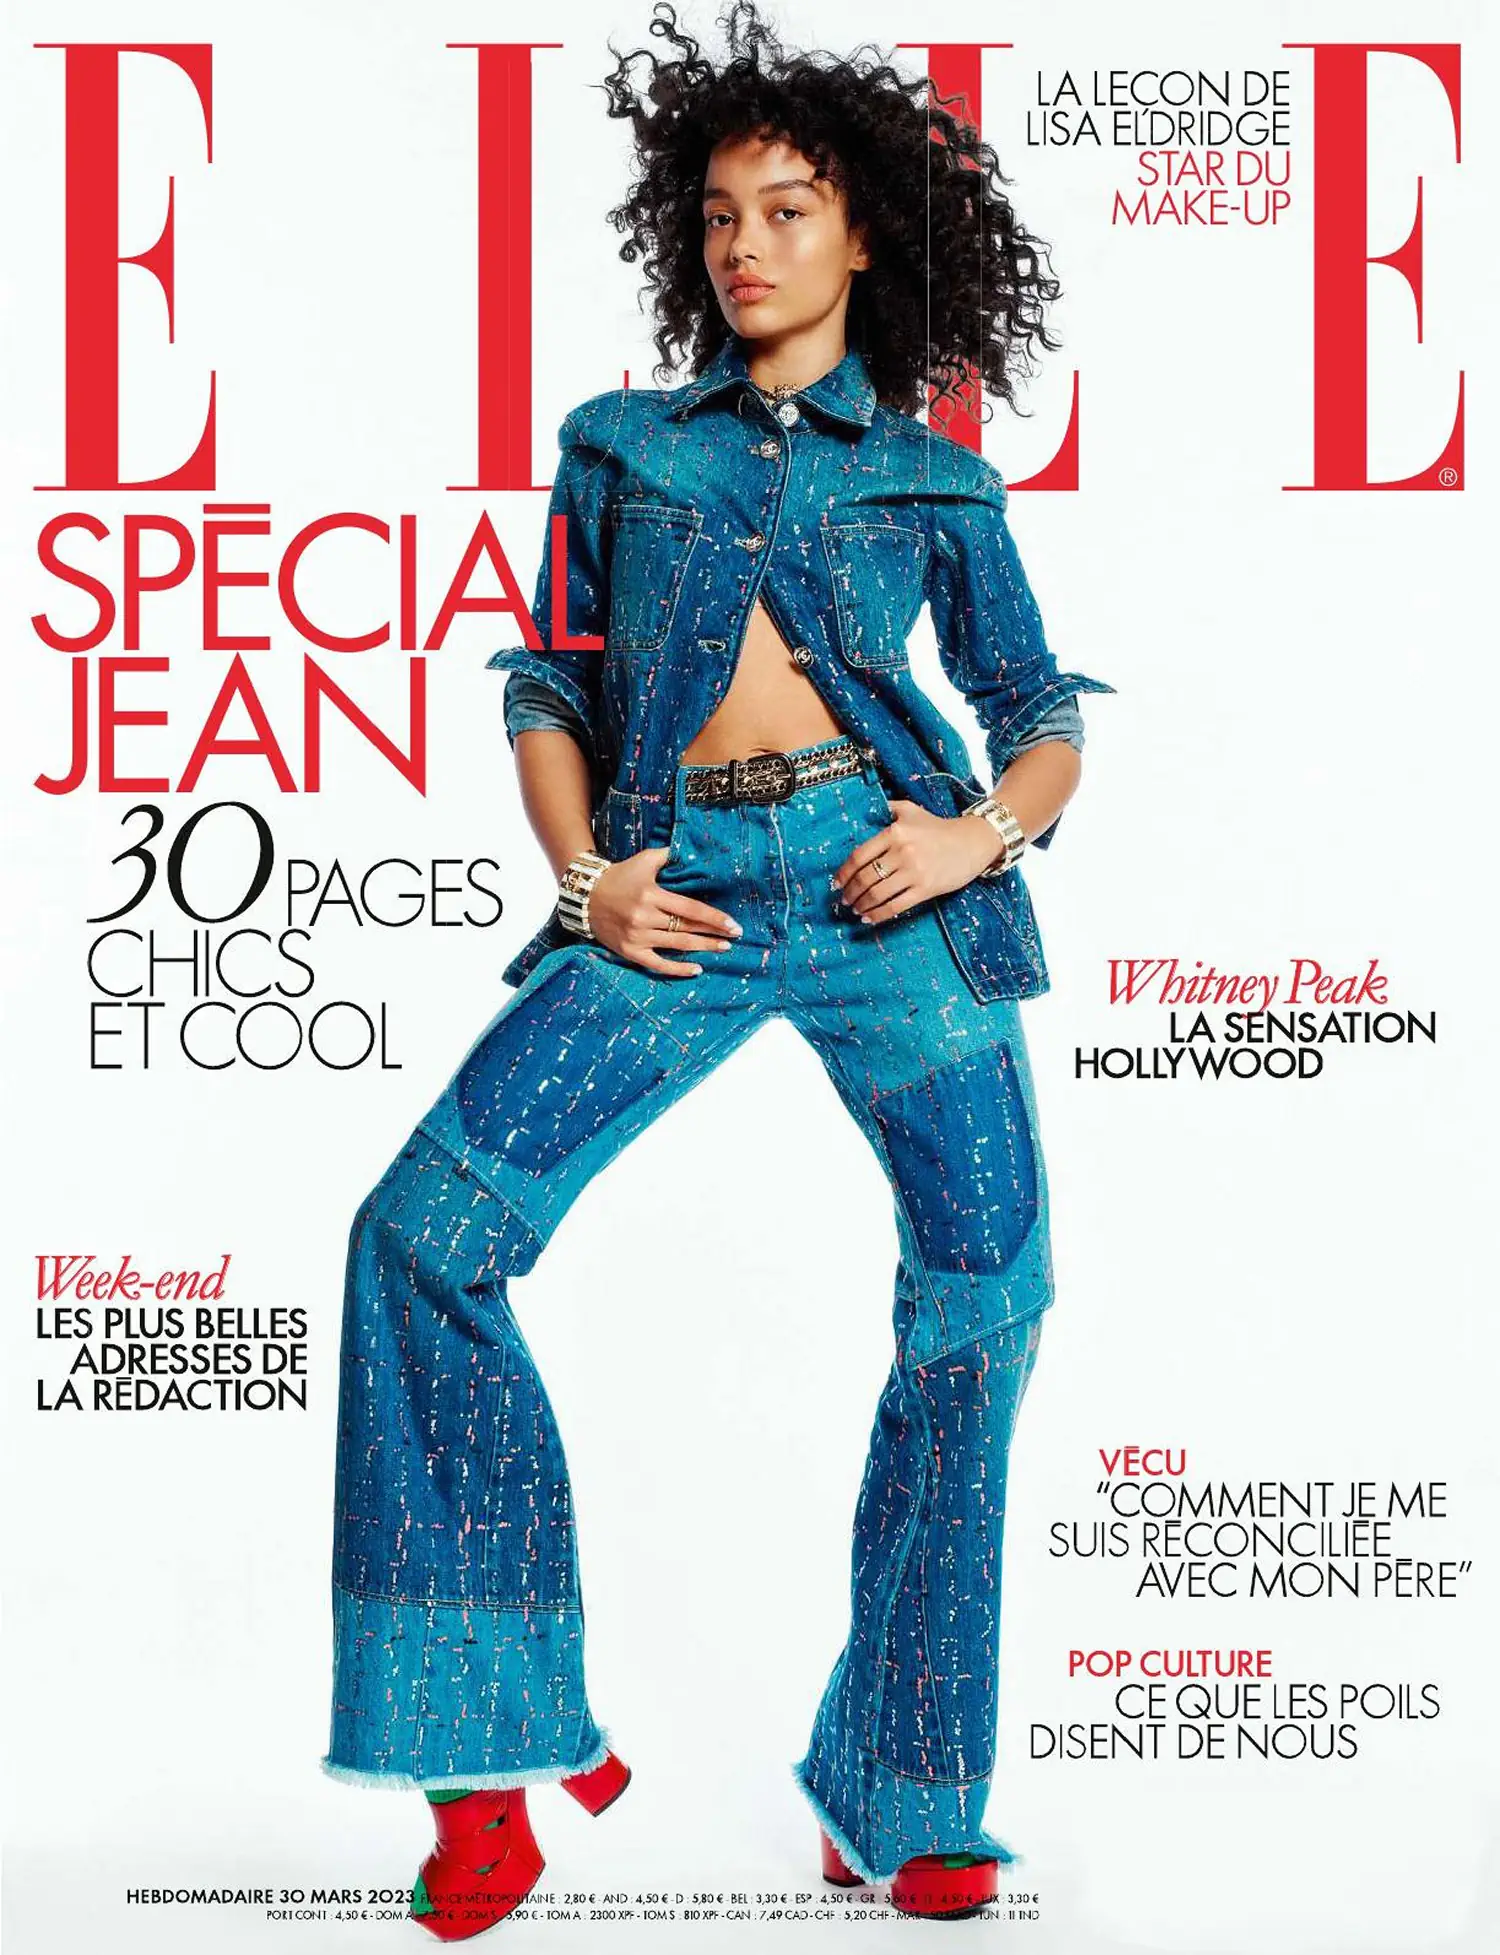 Whitney Peak covers Elle France March 30th, 2023 by Sofia Sanchez & Mauro Mongiello